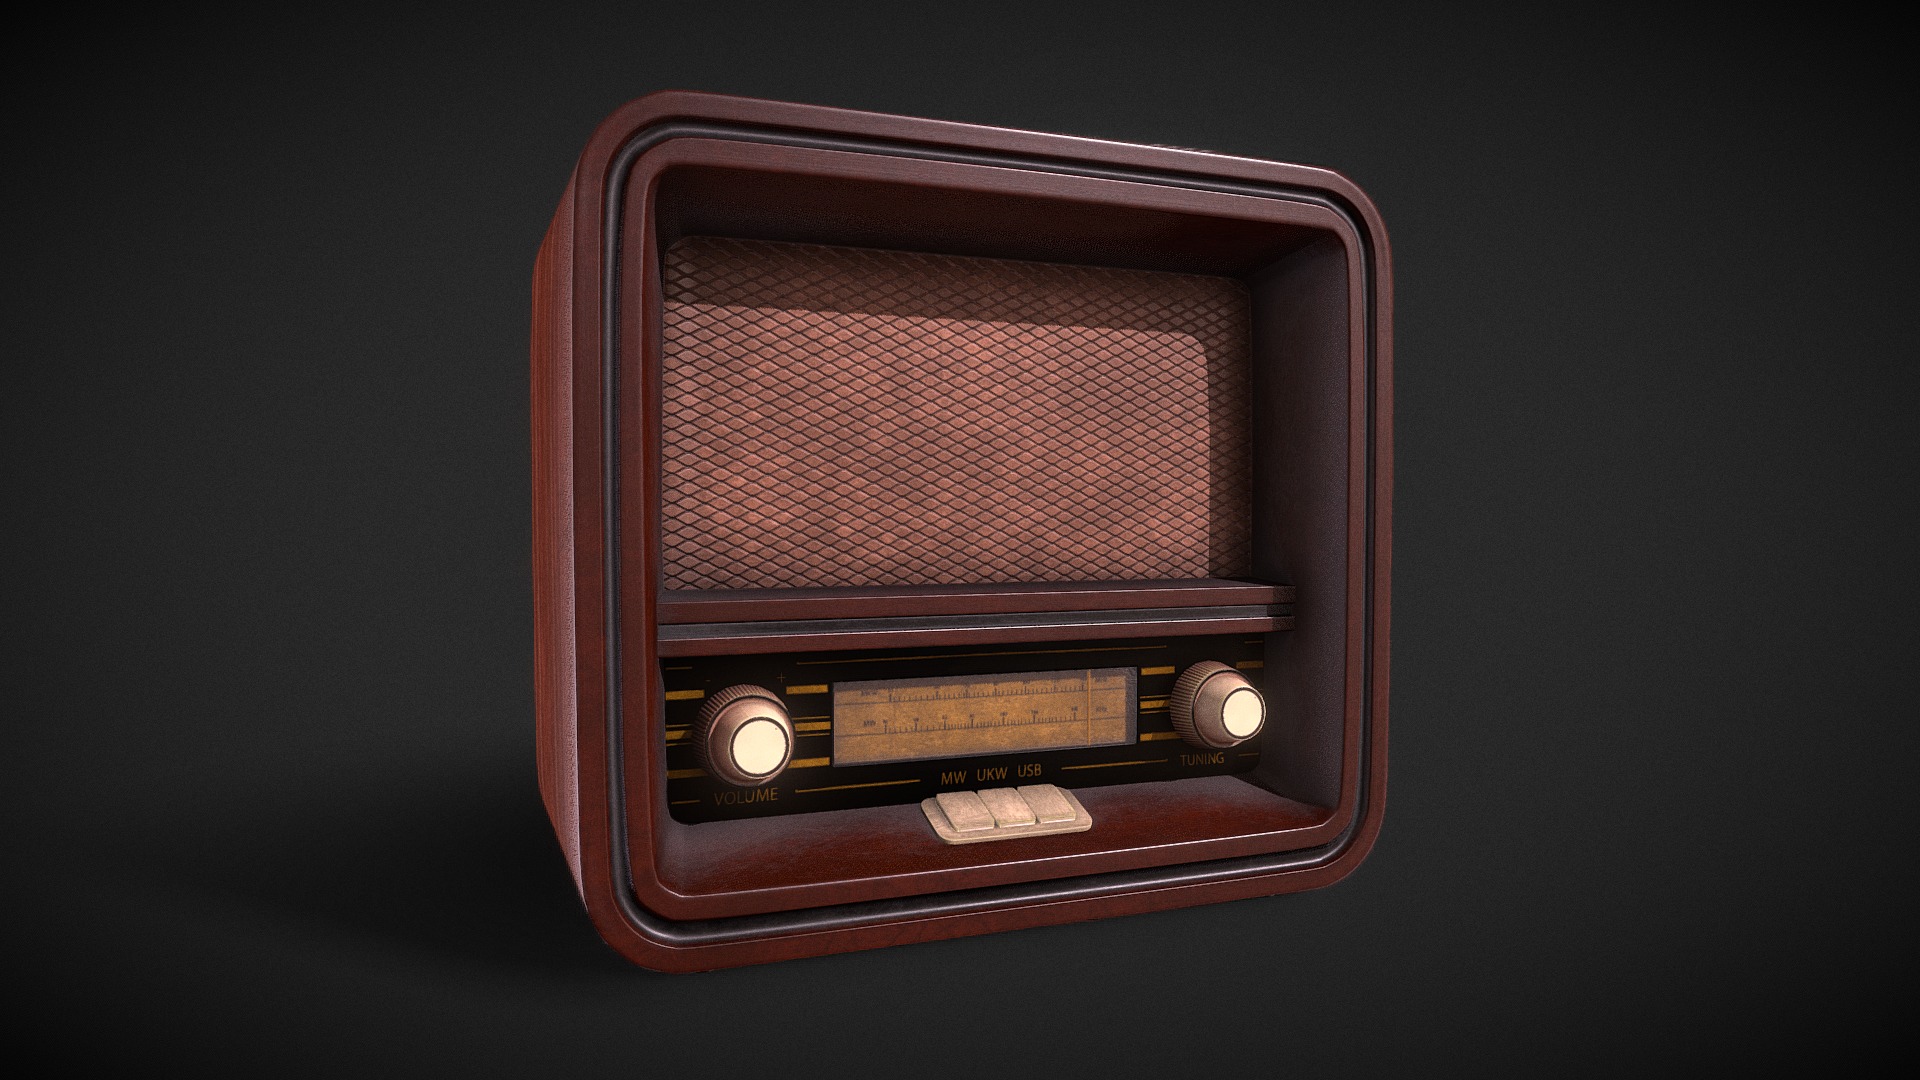 3D model Retro Radio - This is a 3D model of the Retro Radio. The 3D model is about a red rectangular object with buttons and a metal panel.